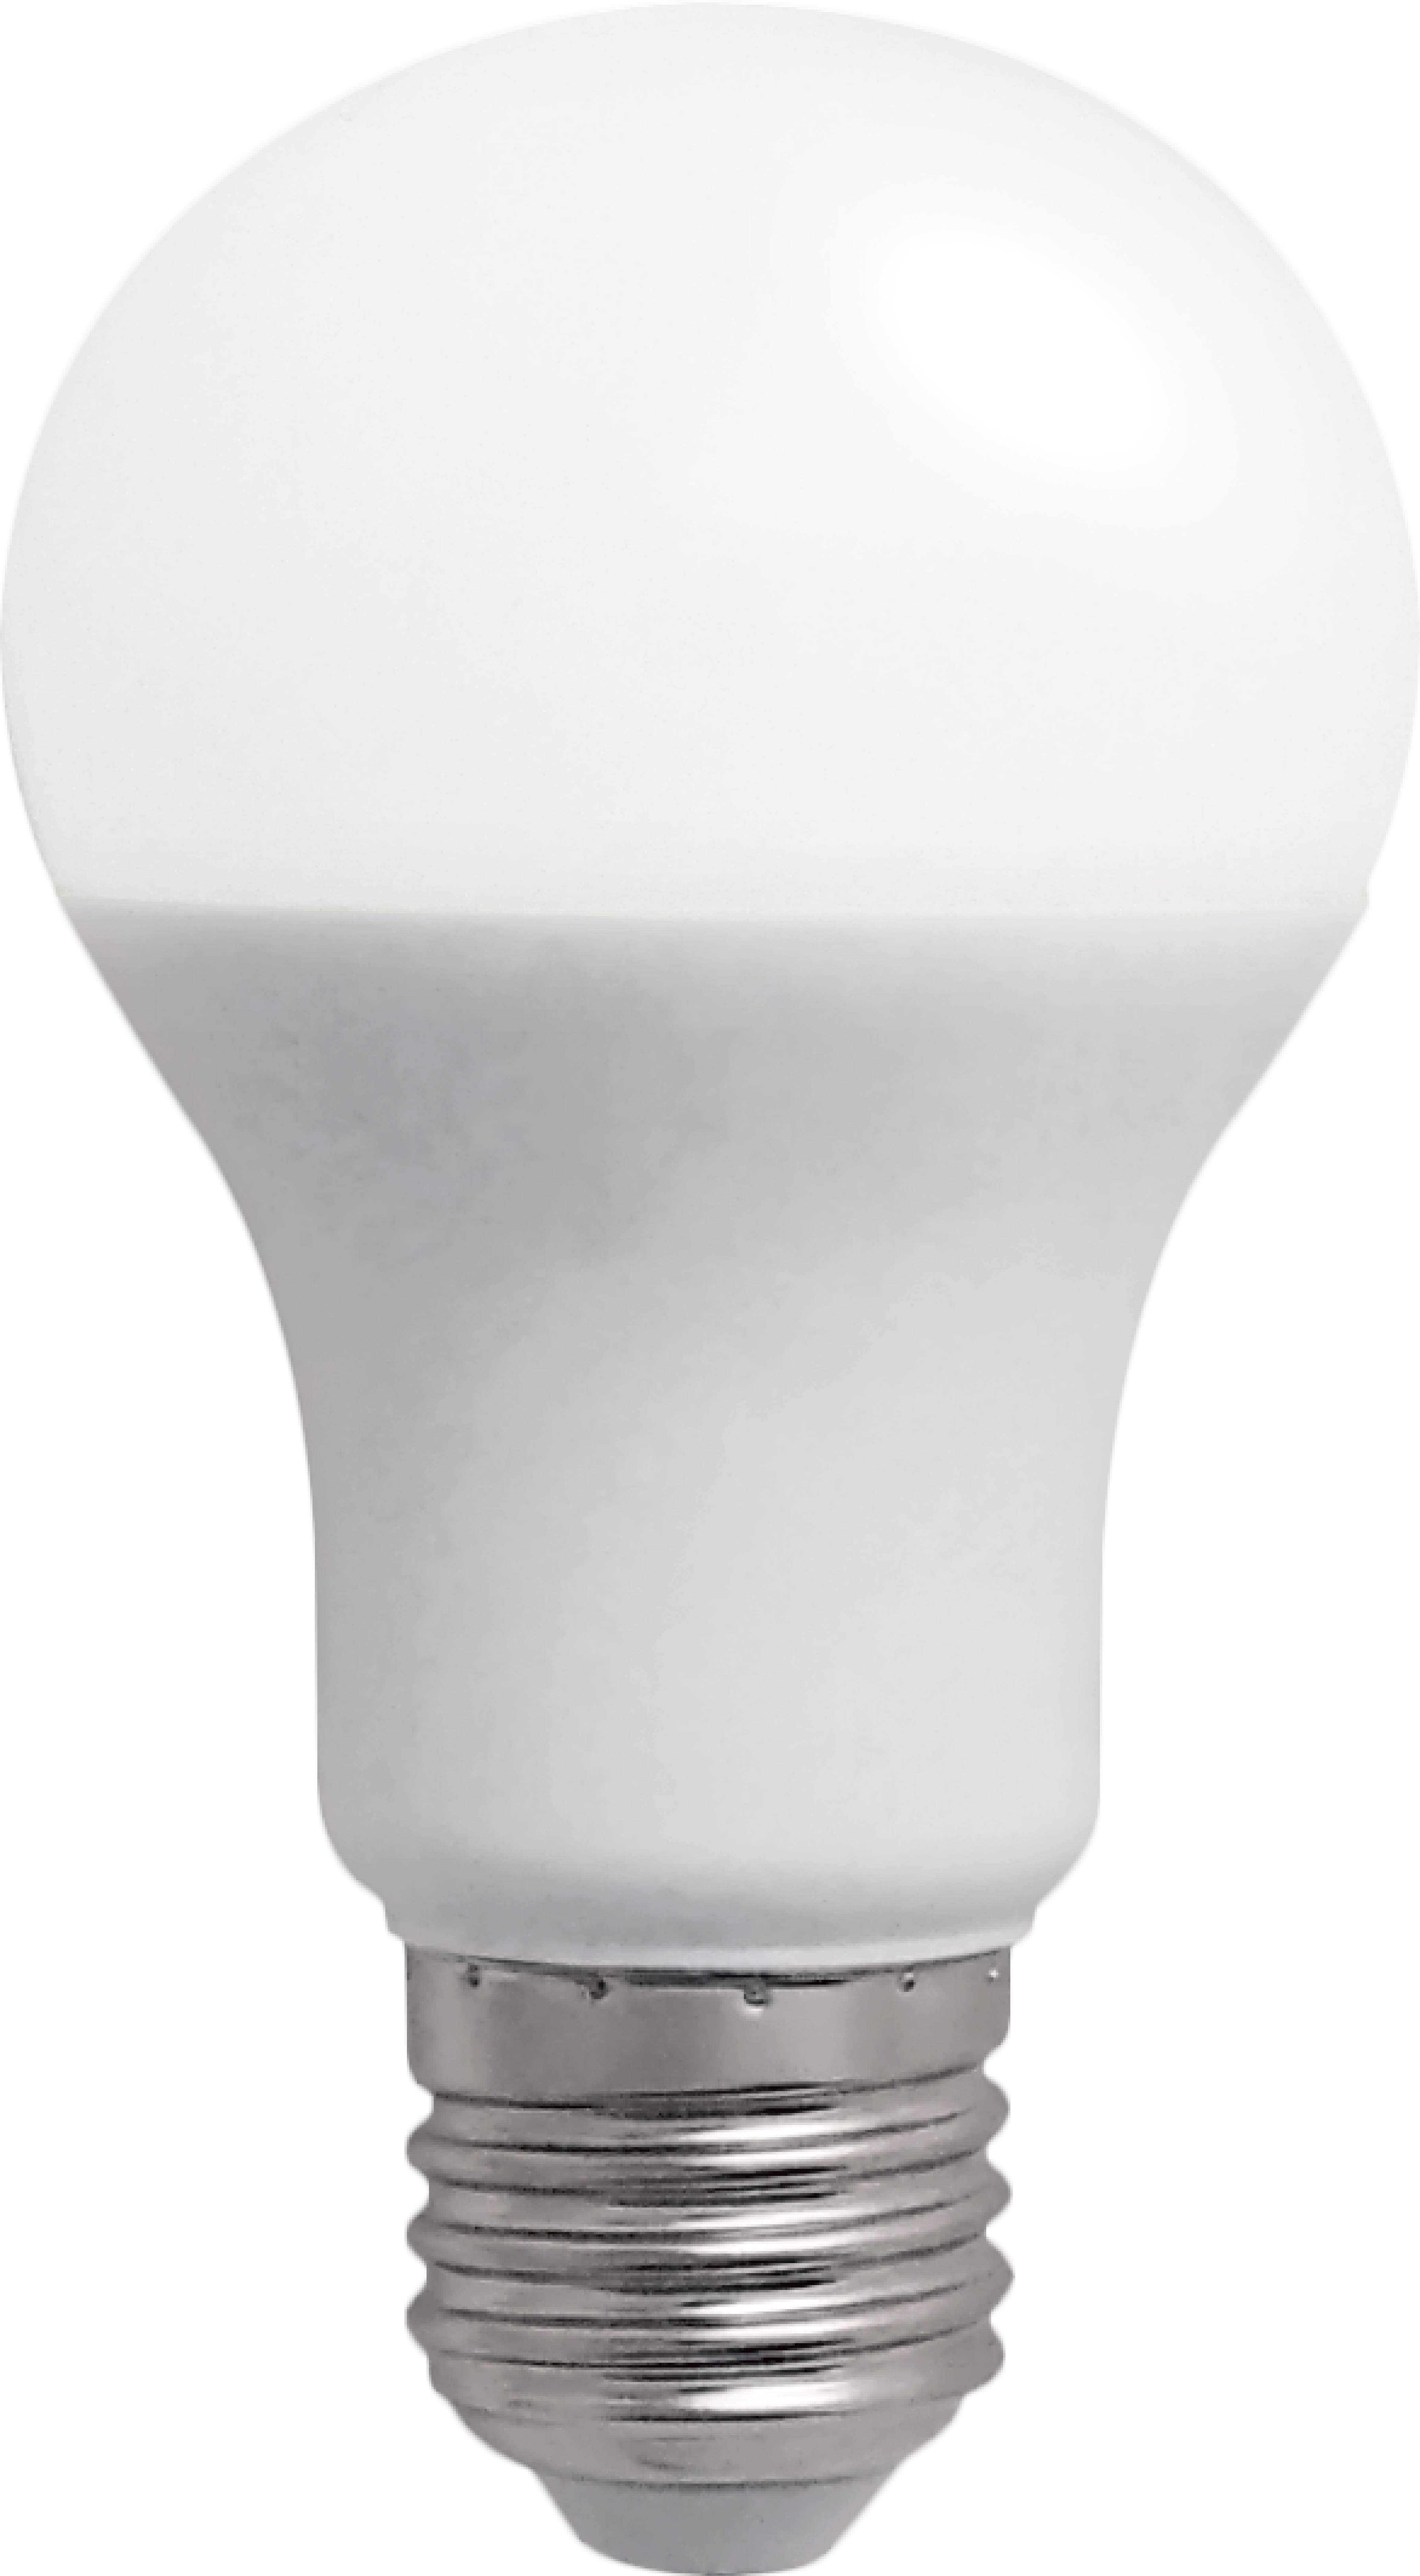 Dimmable A60 LED Bulb 12W 1055lm